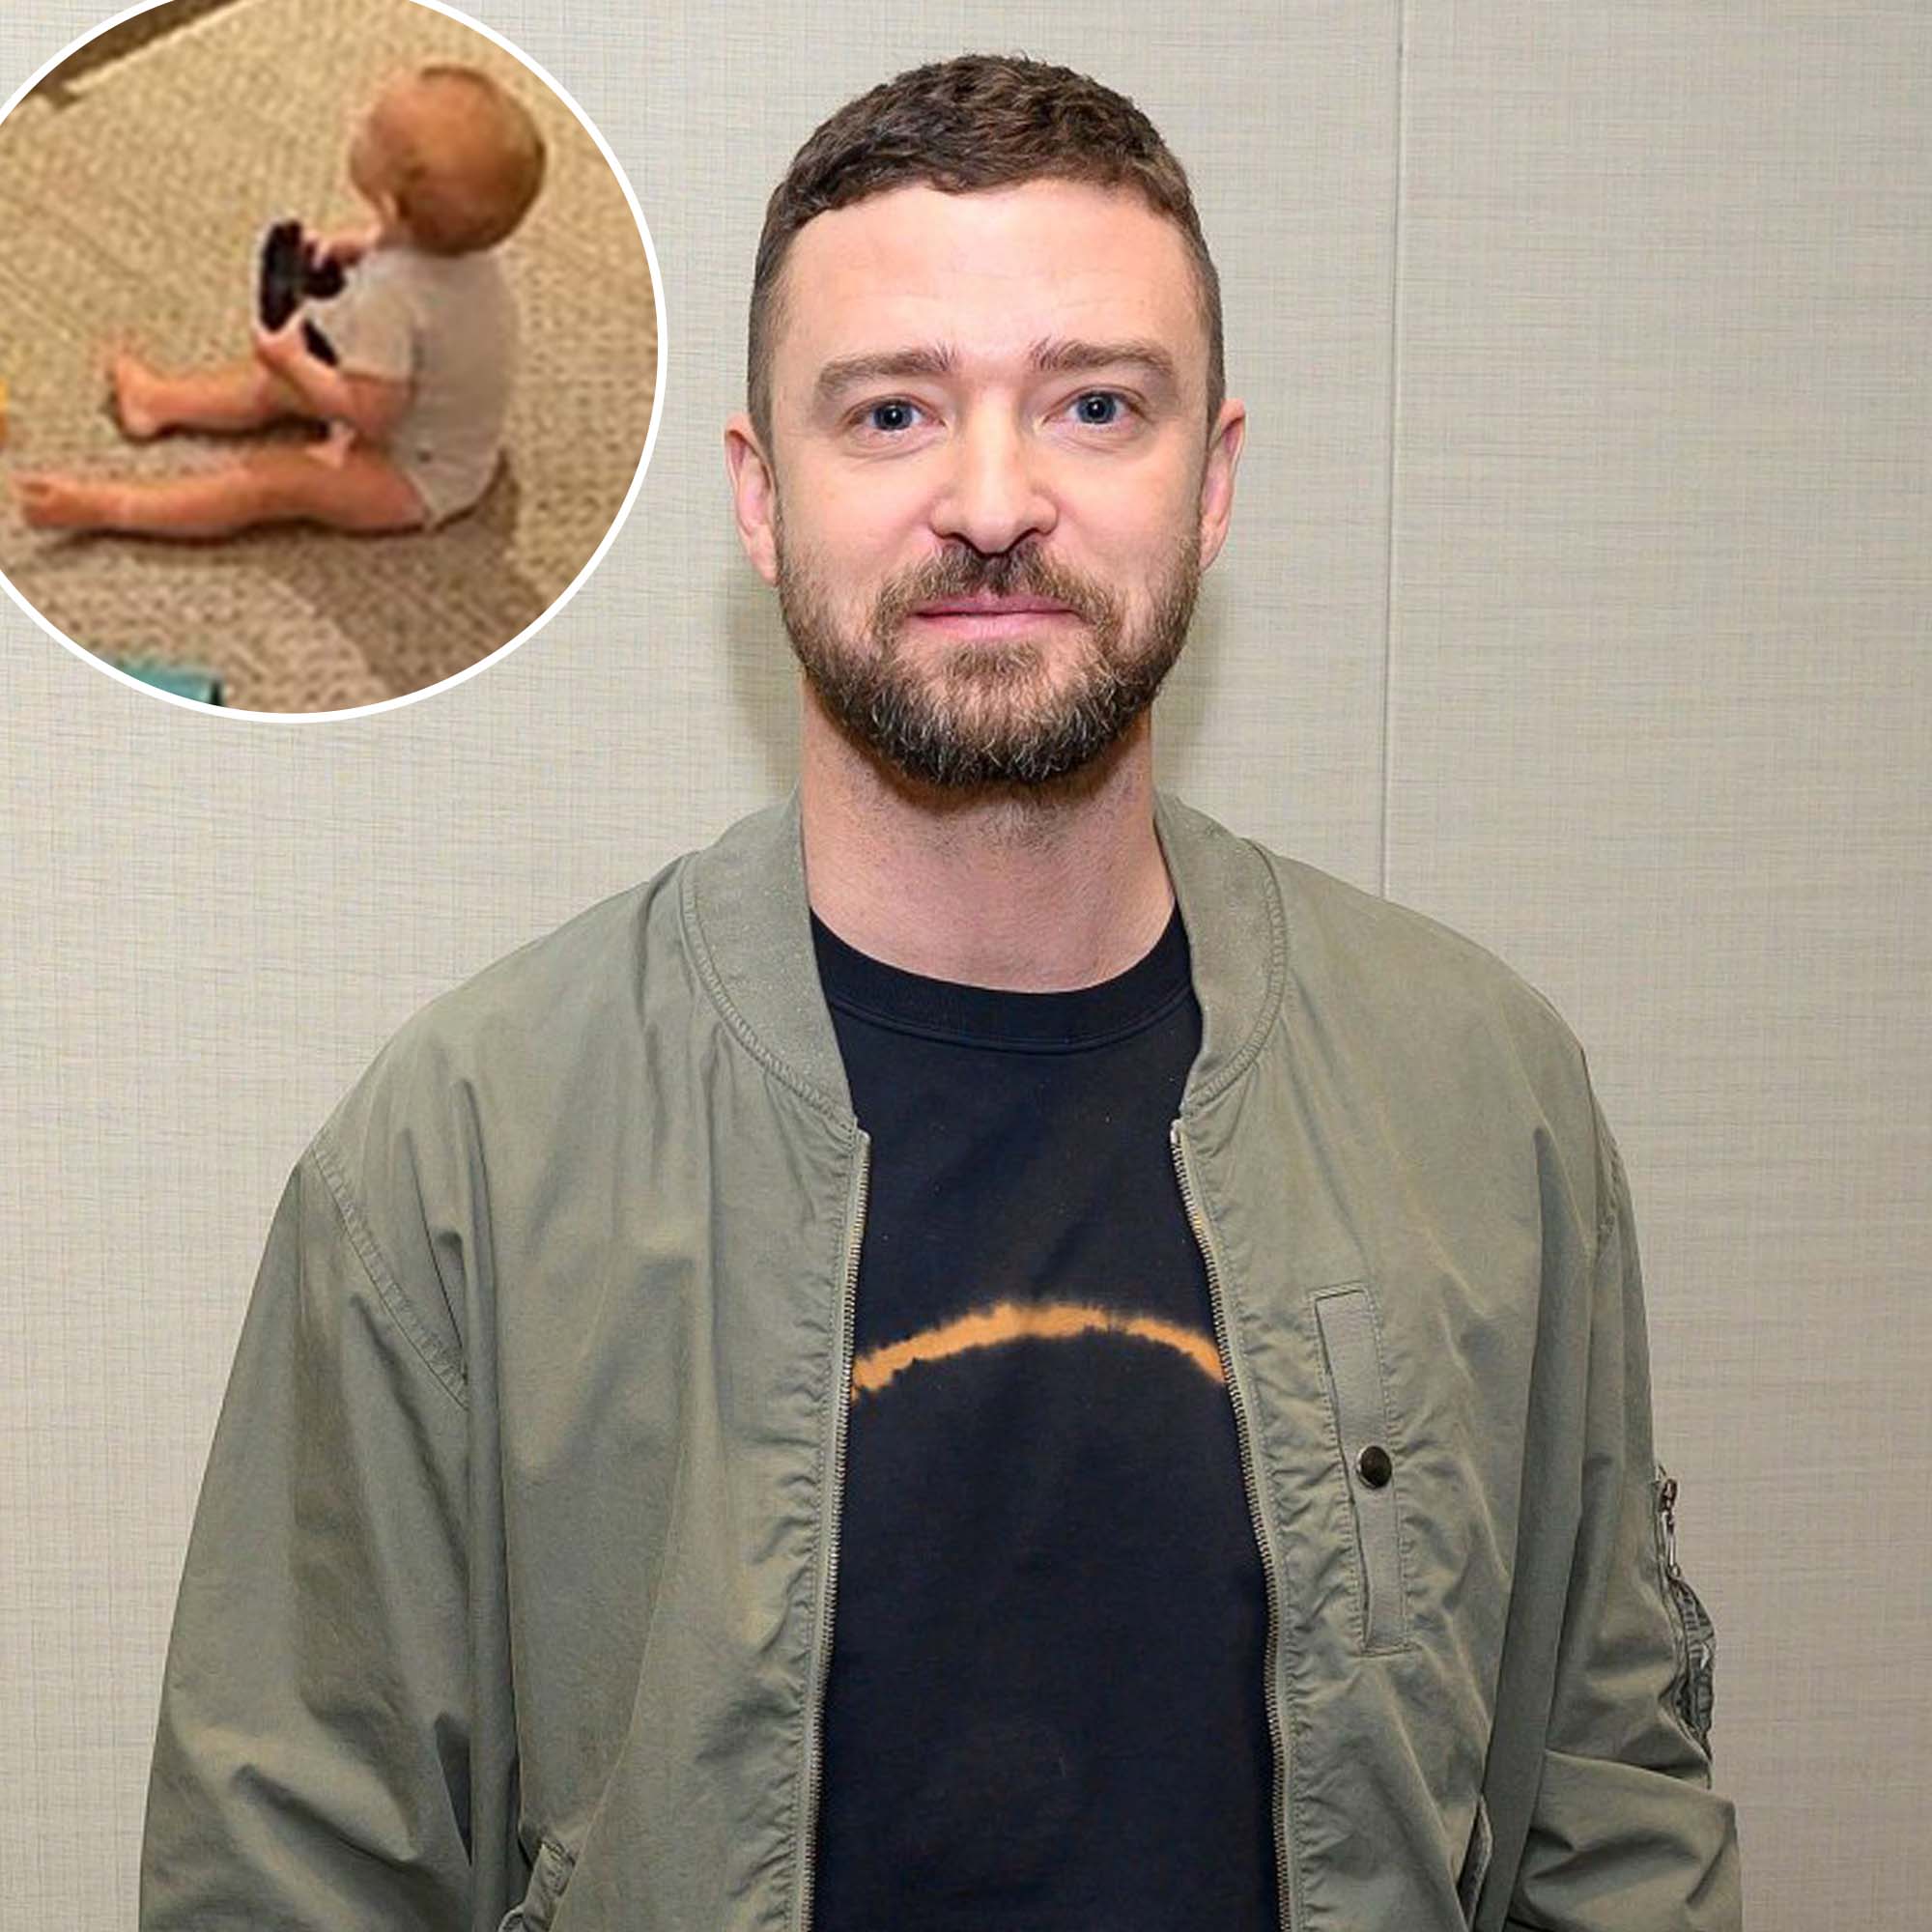 Cry a River Over Justin Timberlake, Jessica Biel's Sweet Family Album